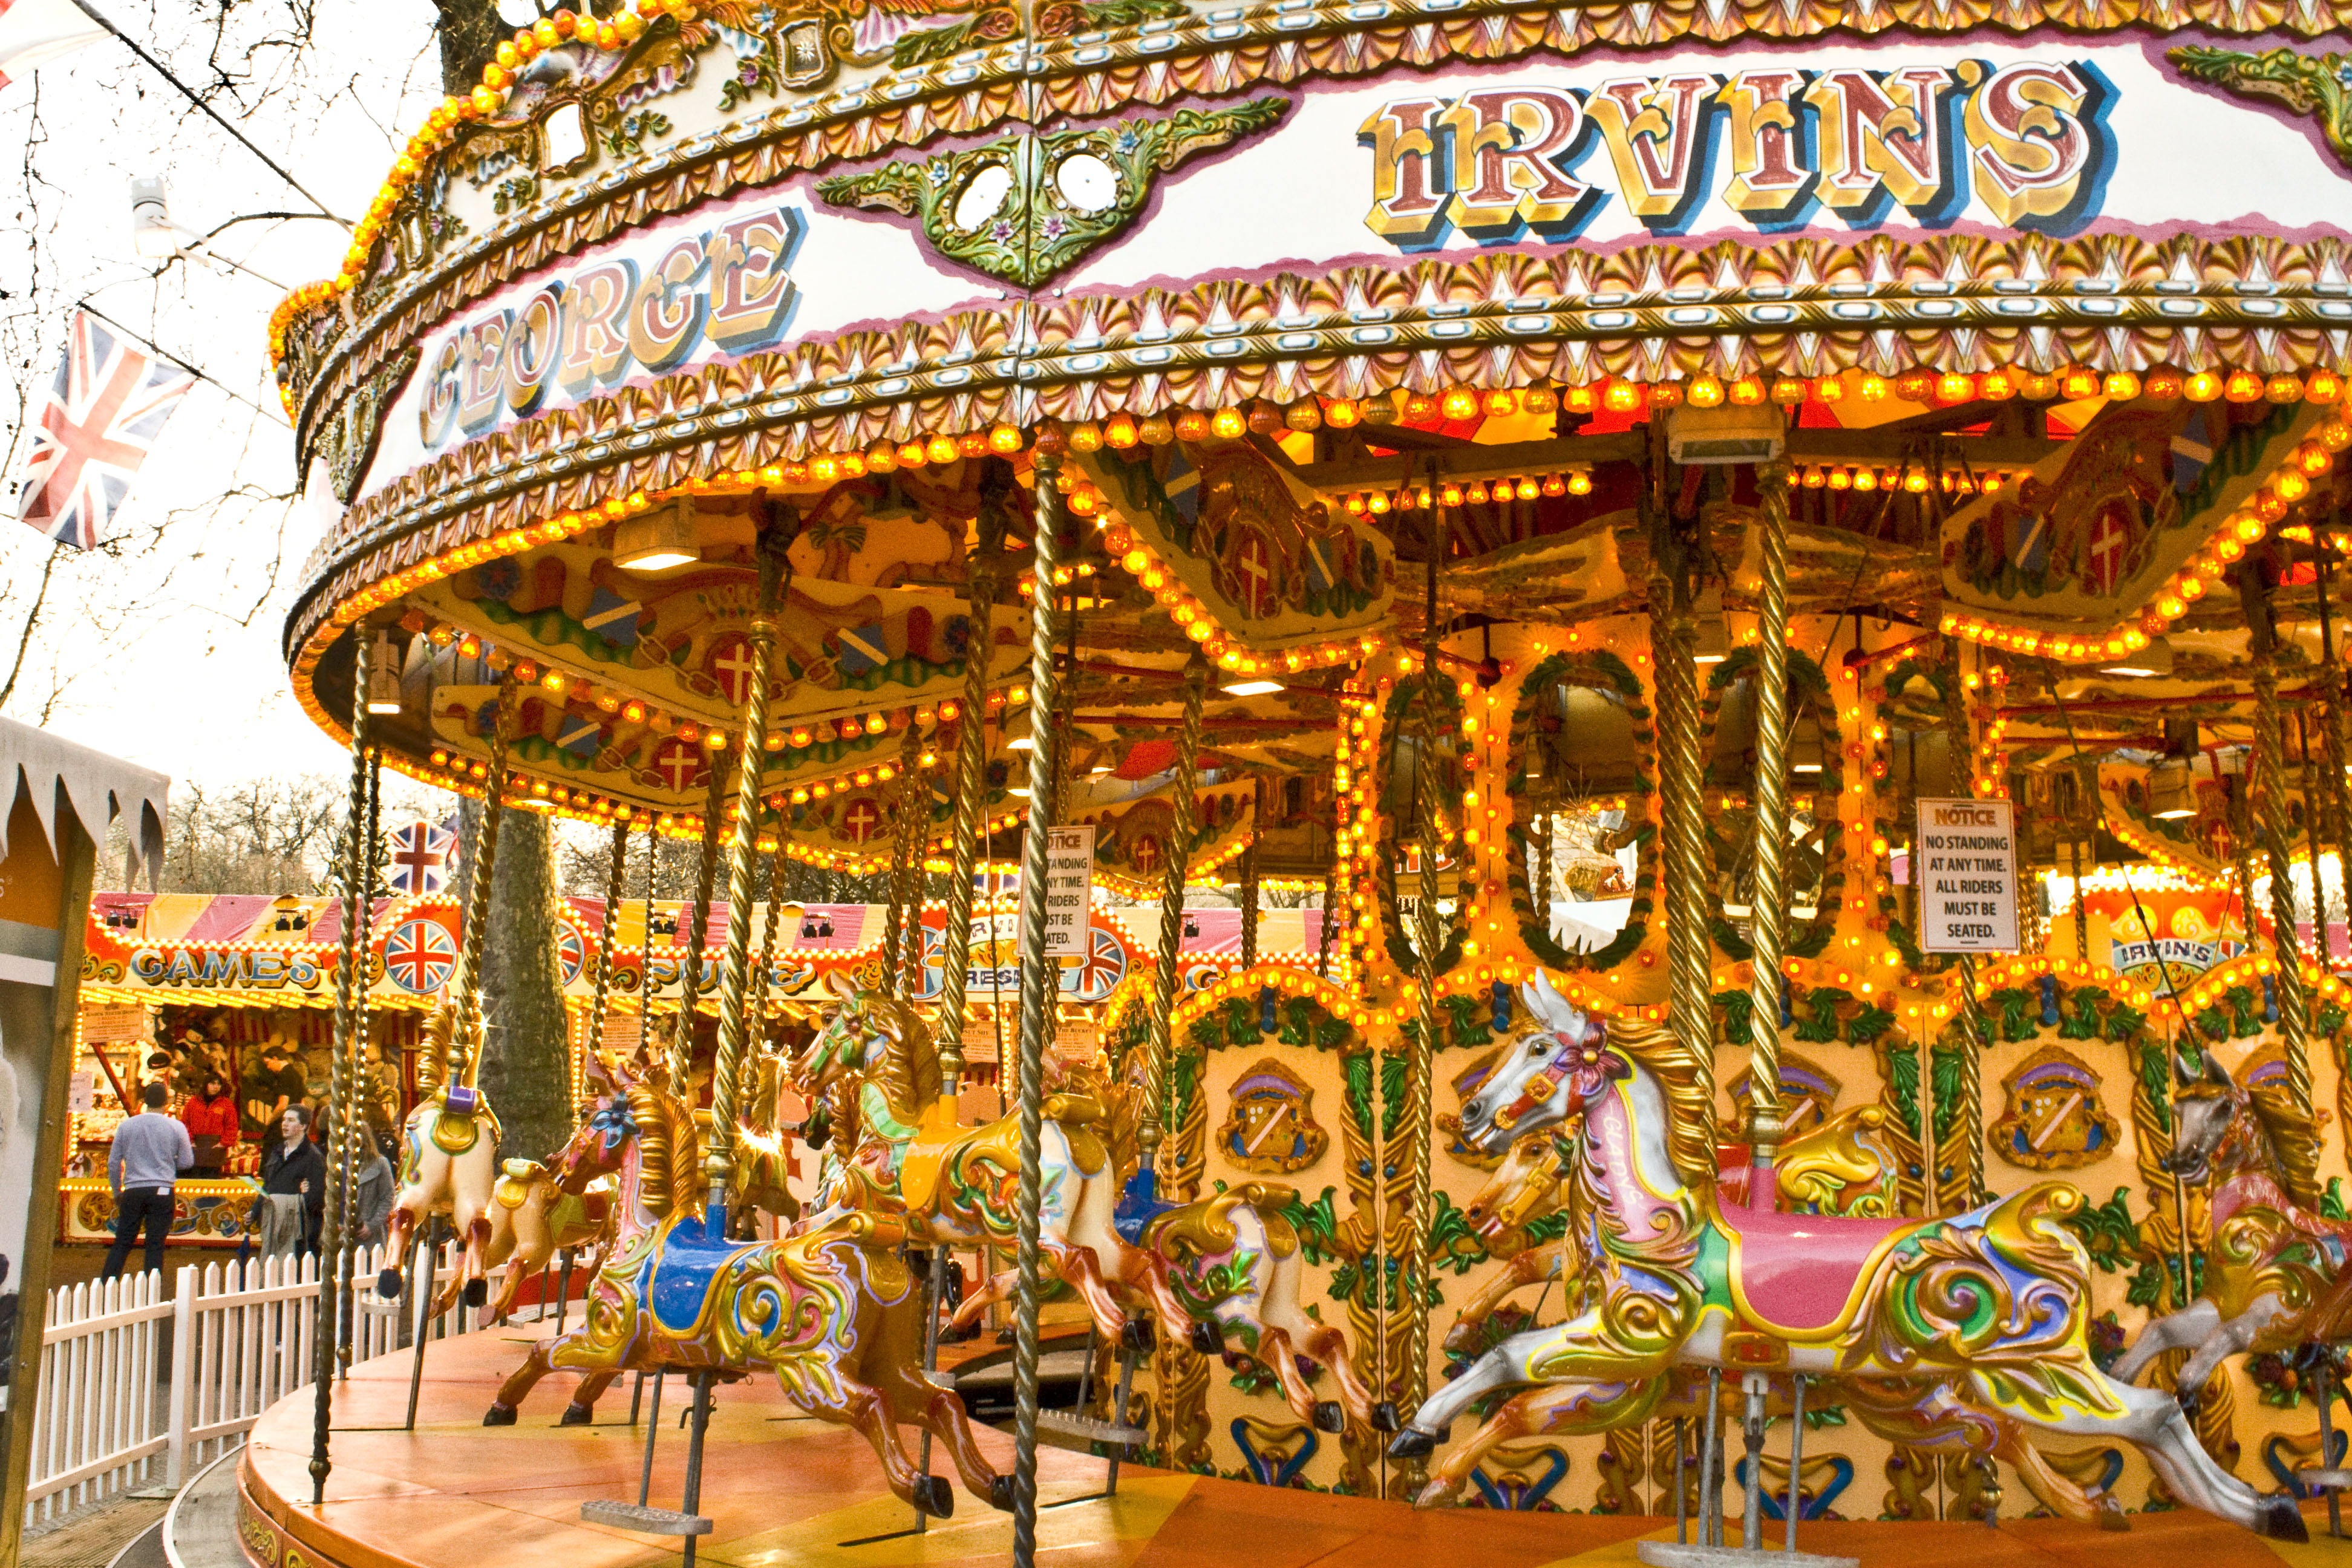 Carousel Wallpapers High Quality Download Free HD Wallpapers Download Free Images Wallpaper [wallpaper981.blogspot.com]